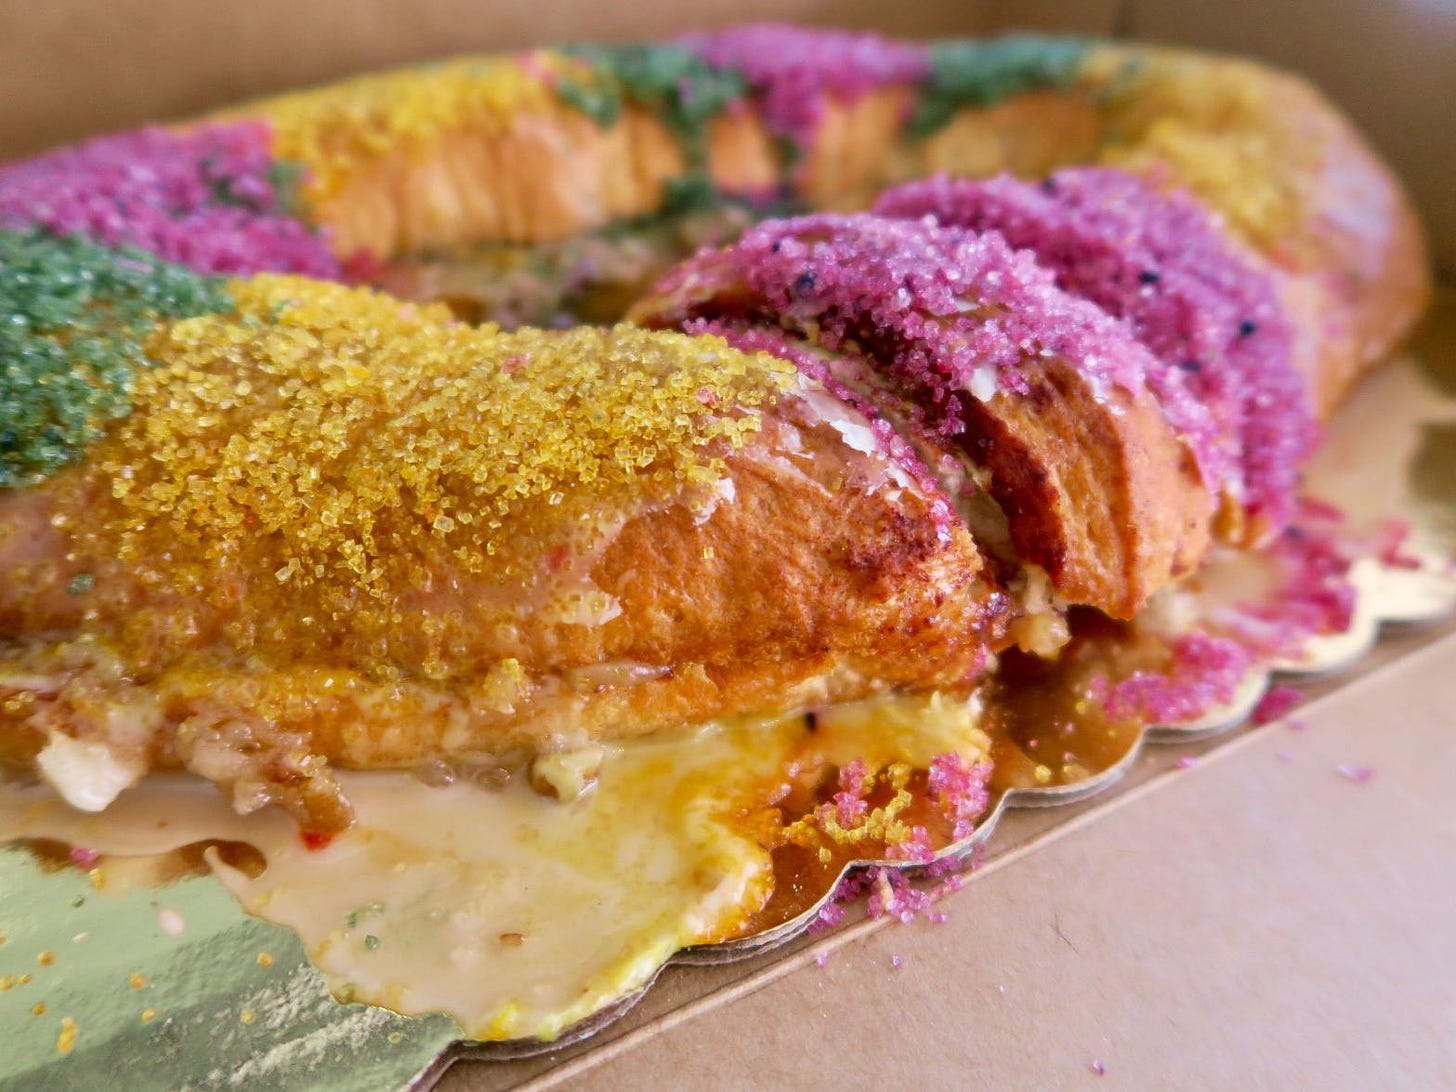 With vegan king cakes and biscuit sandwiches, Breads on Oak opens second  bakery in CBD | Where NOLA Eats | nola.com